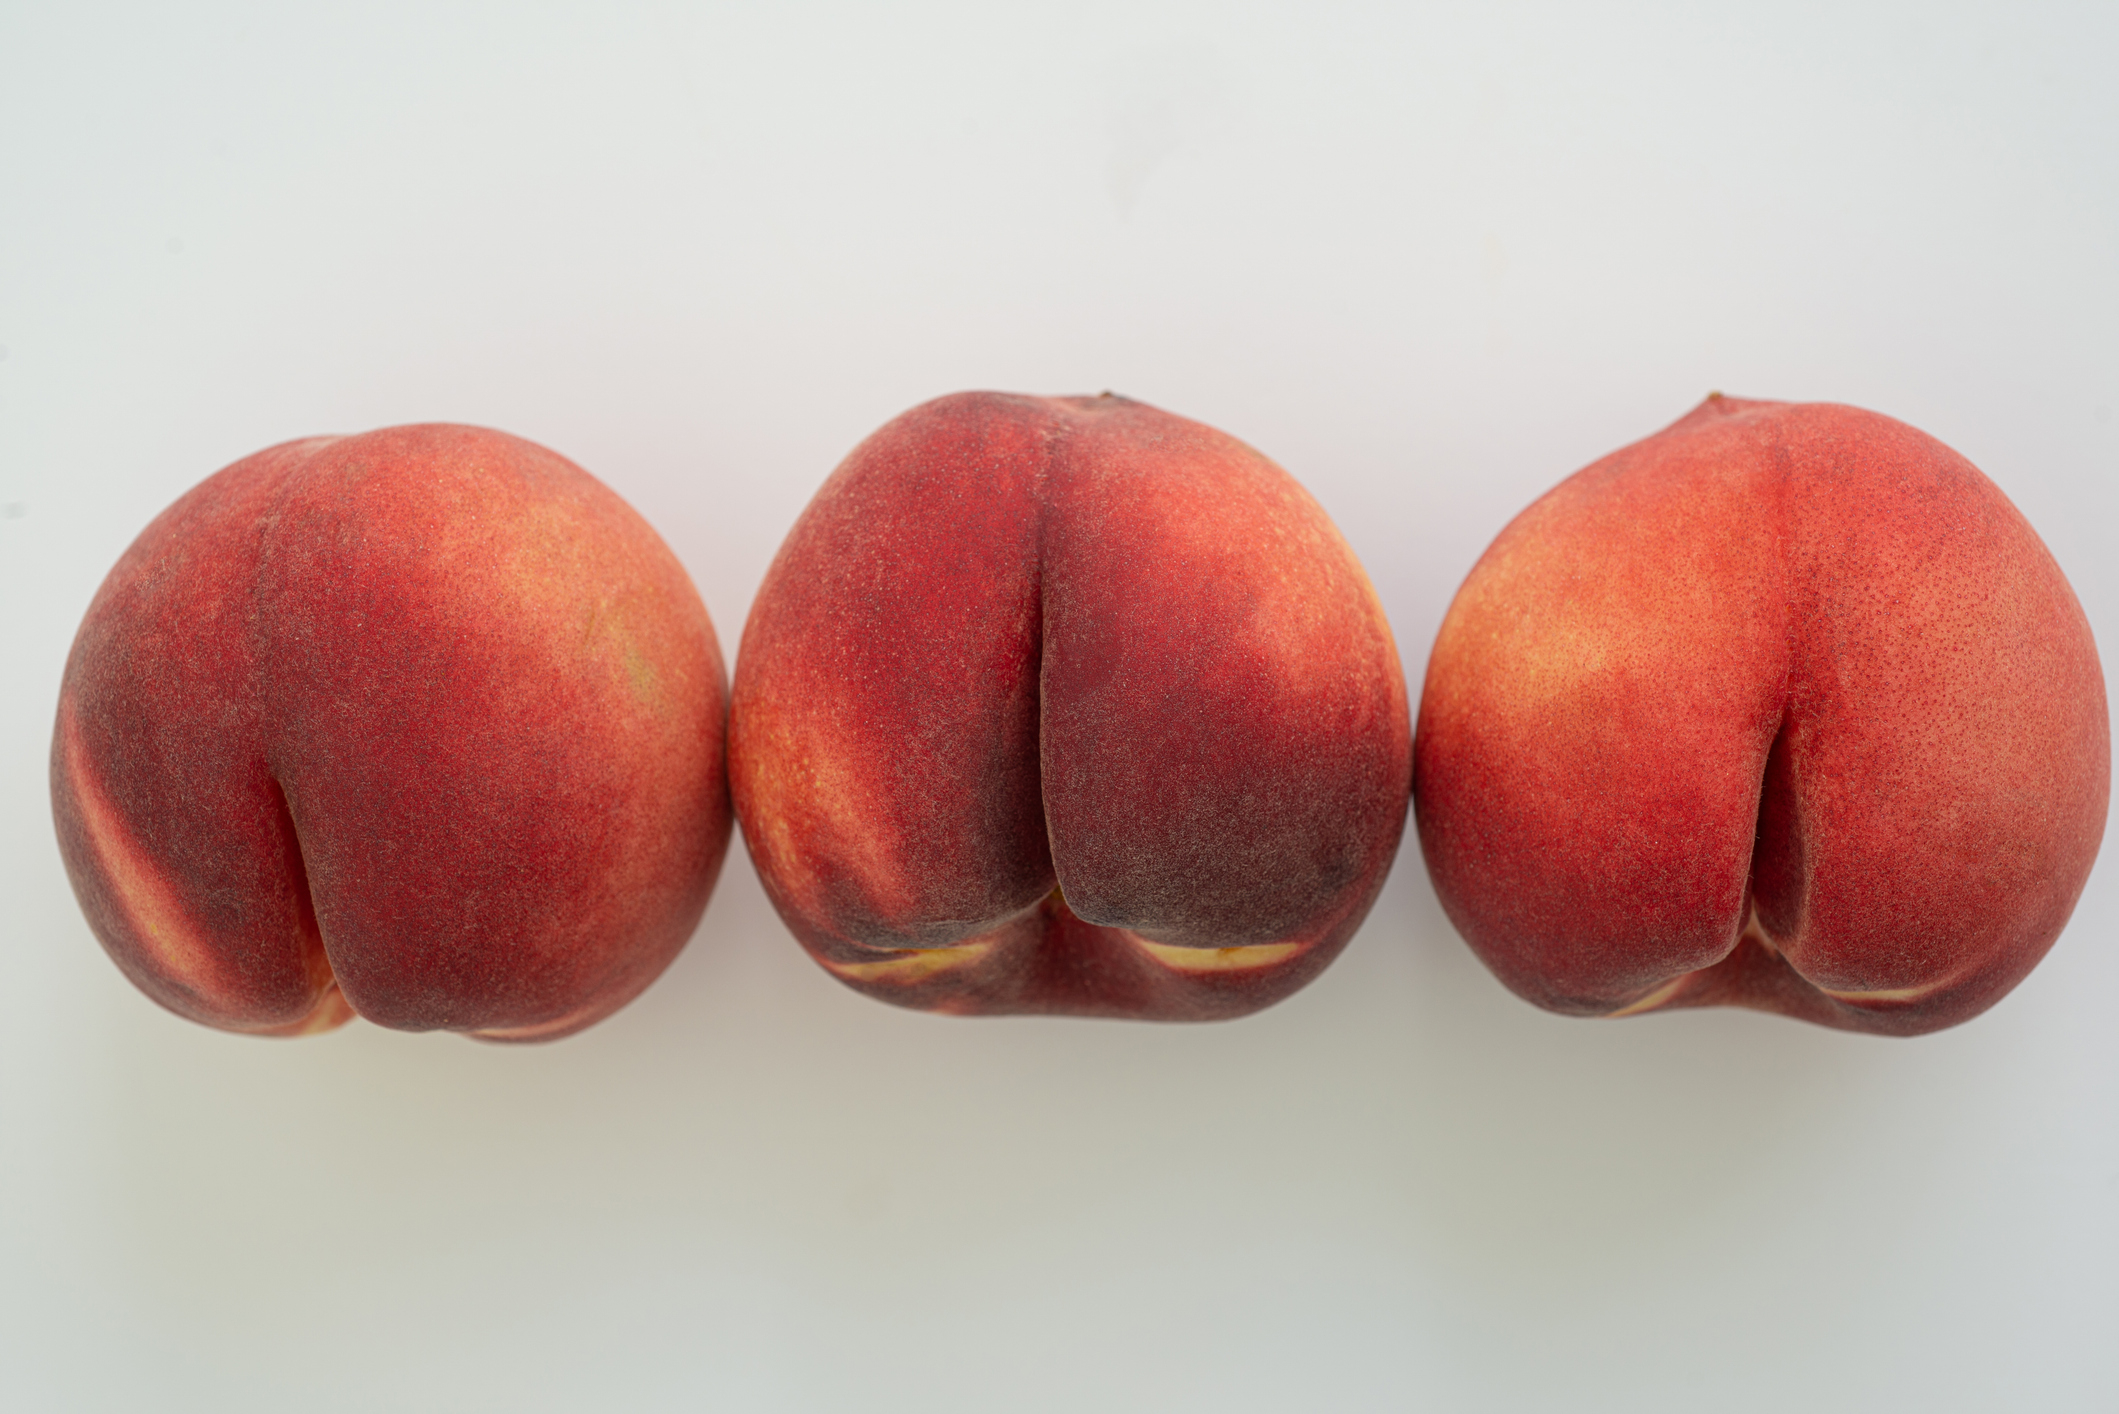 Three peaches in a row resembling human buttocks, suggesting a playful take on sensuality